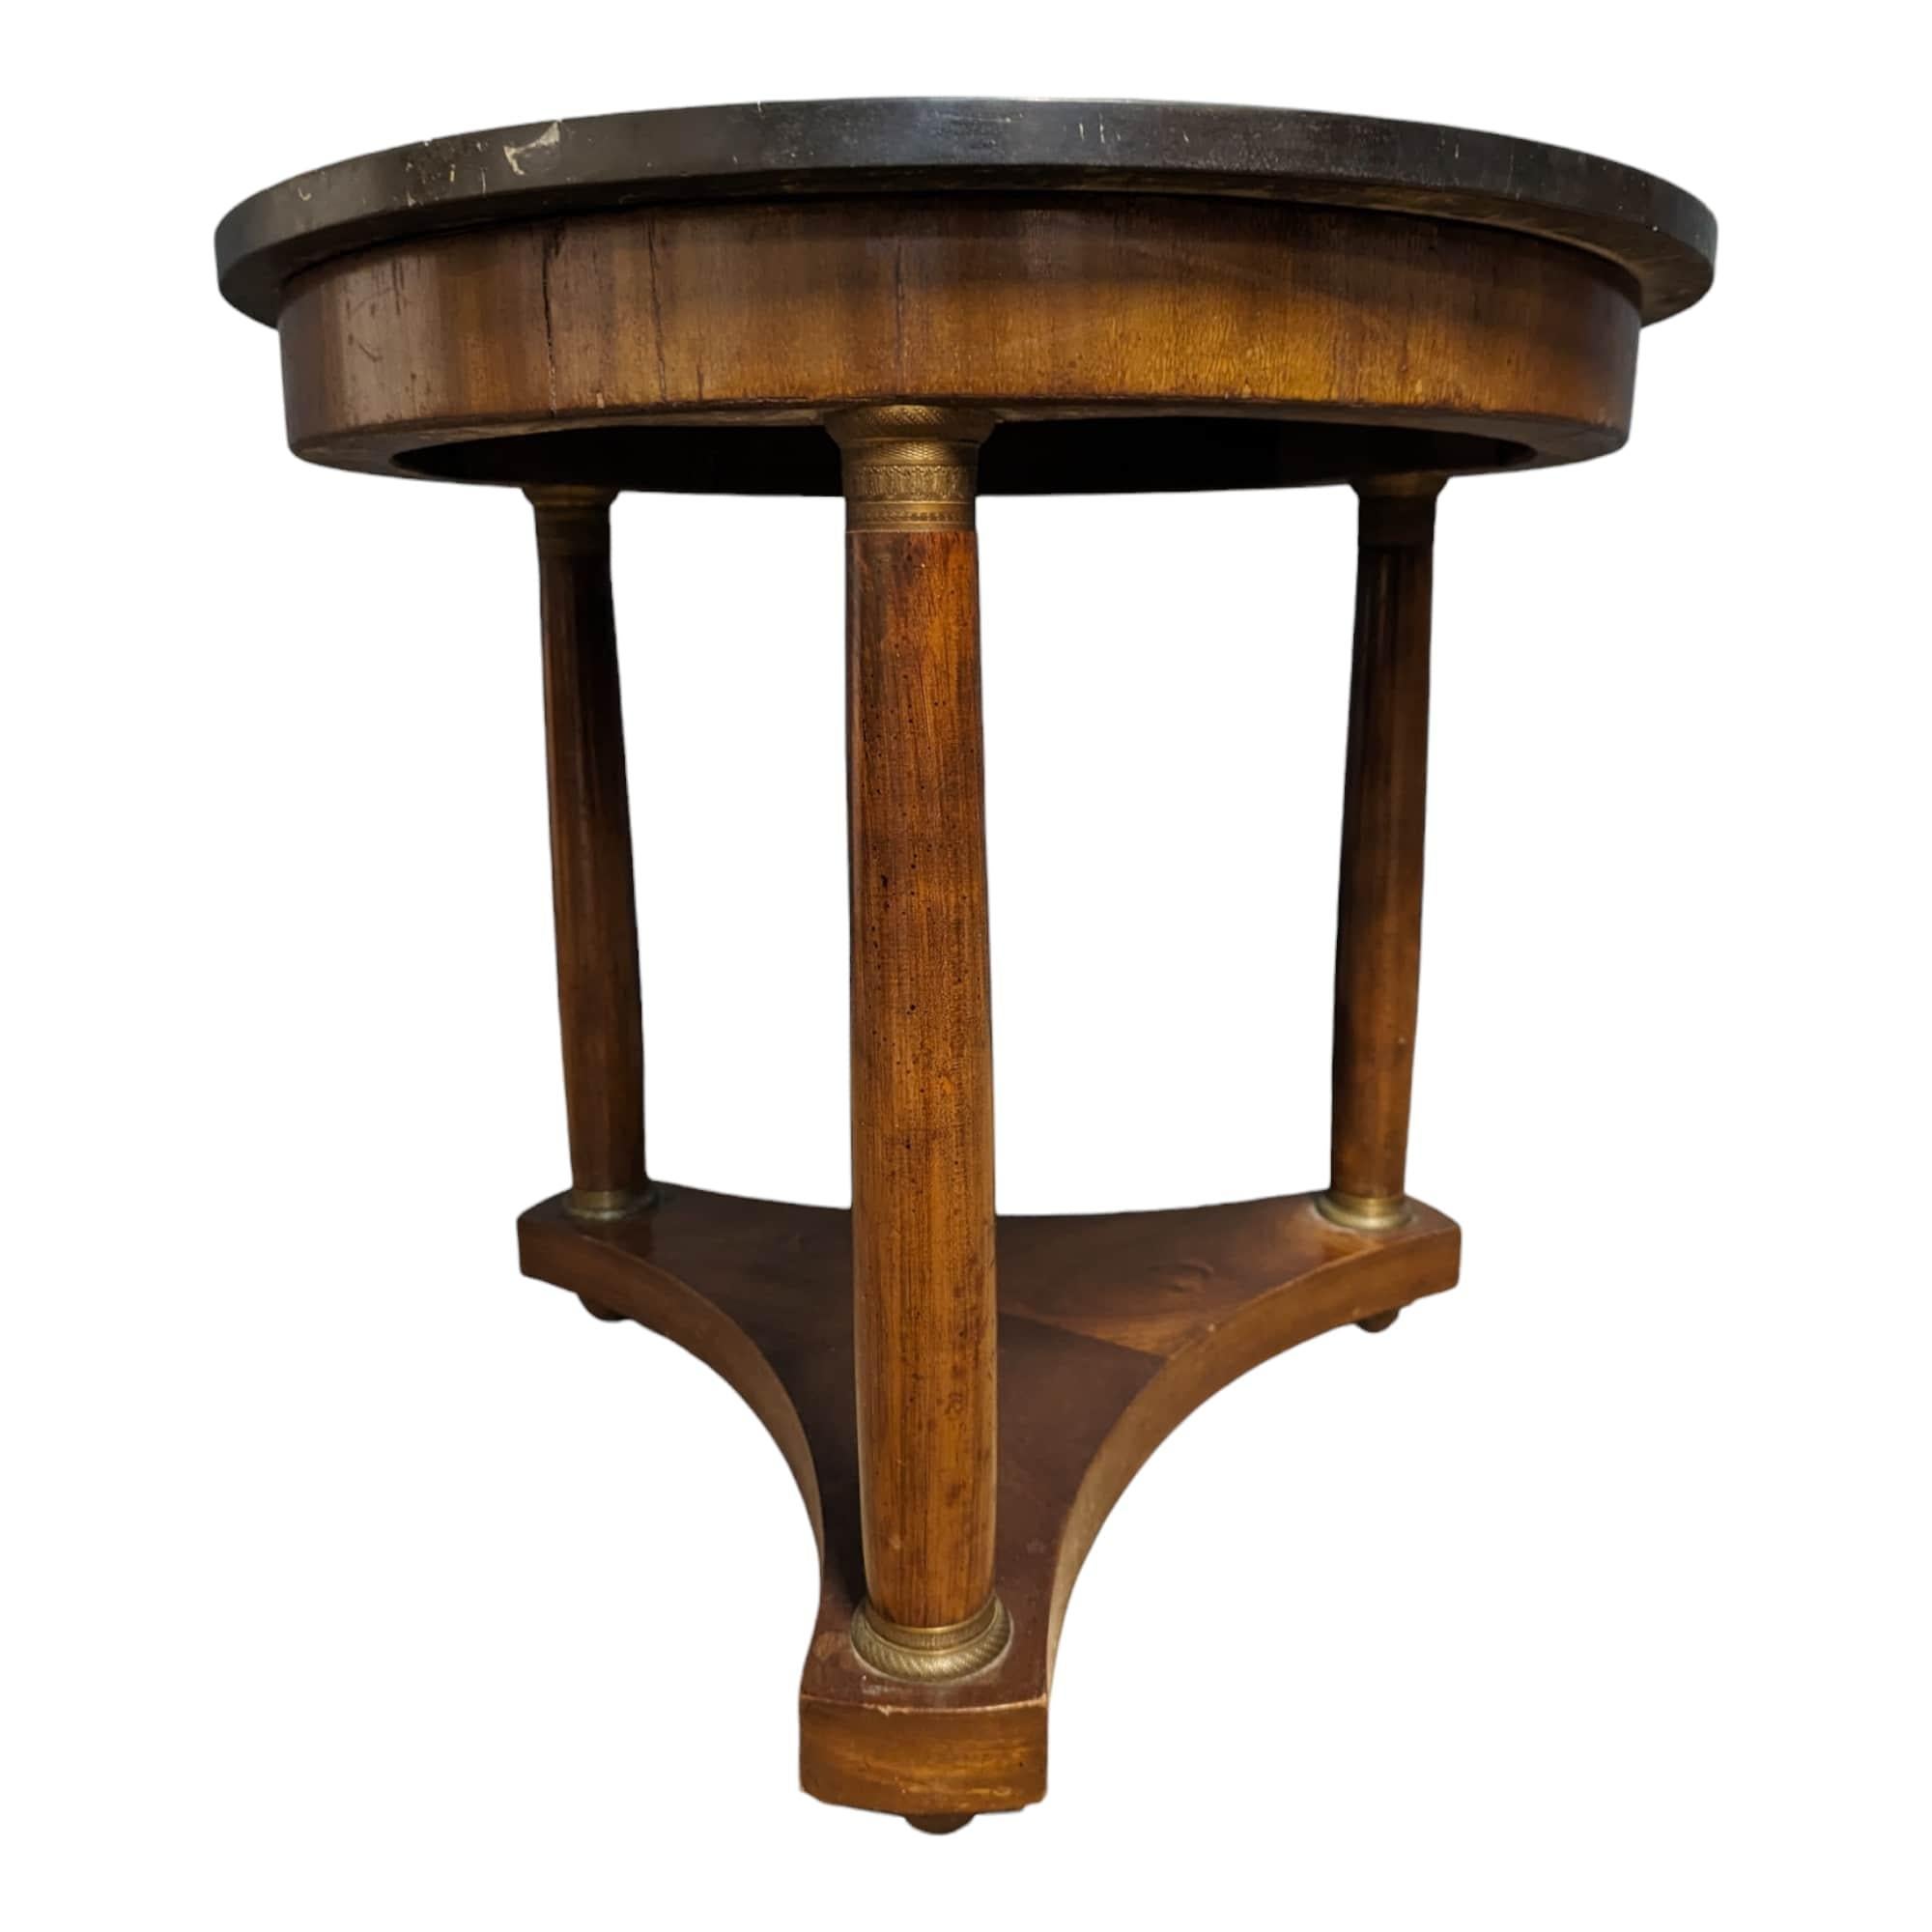 Coming from France. Immerse yourself in the opulence and refinement of the Empire style with this superb mahogany pedestal table, a piece that evokes the majestic elegance of the Napoleonic era.

This pedestal table perfectly embodies the imperial